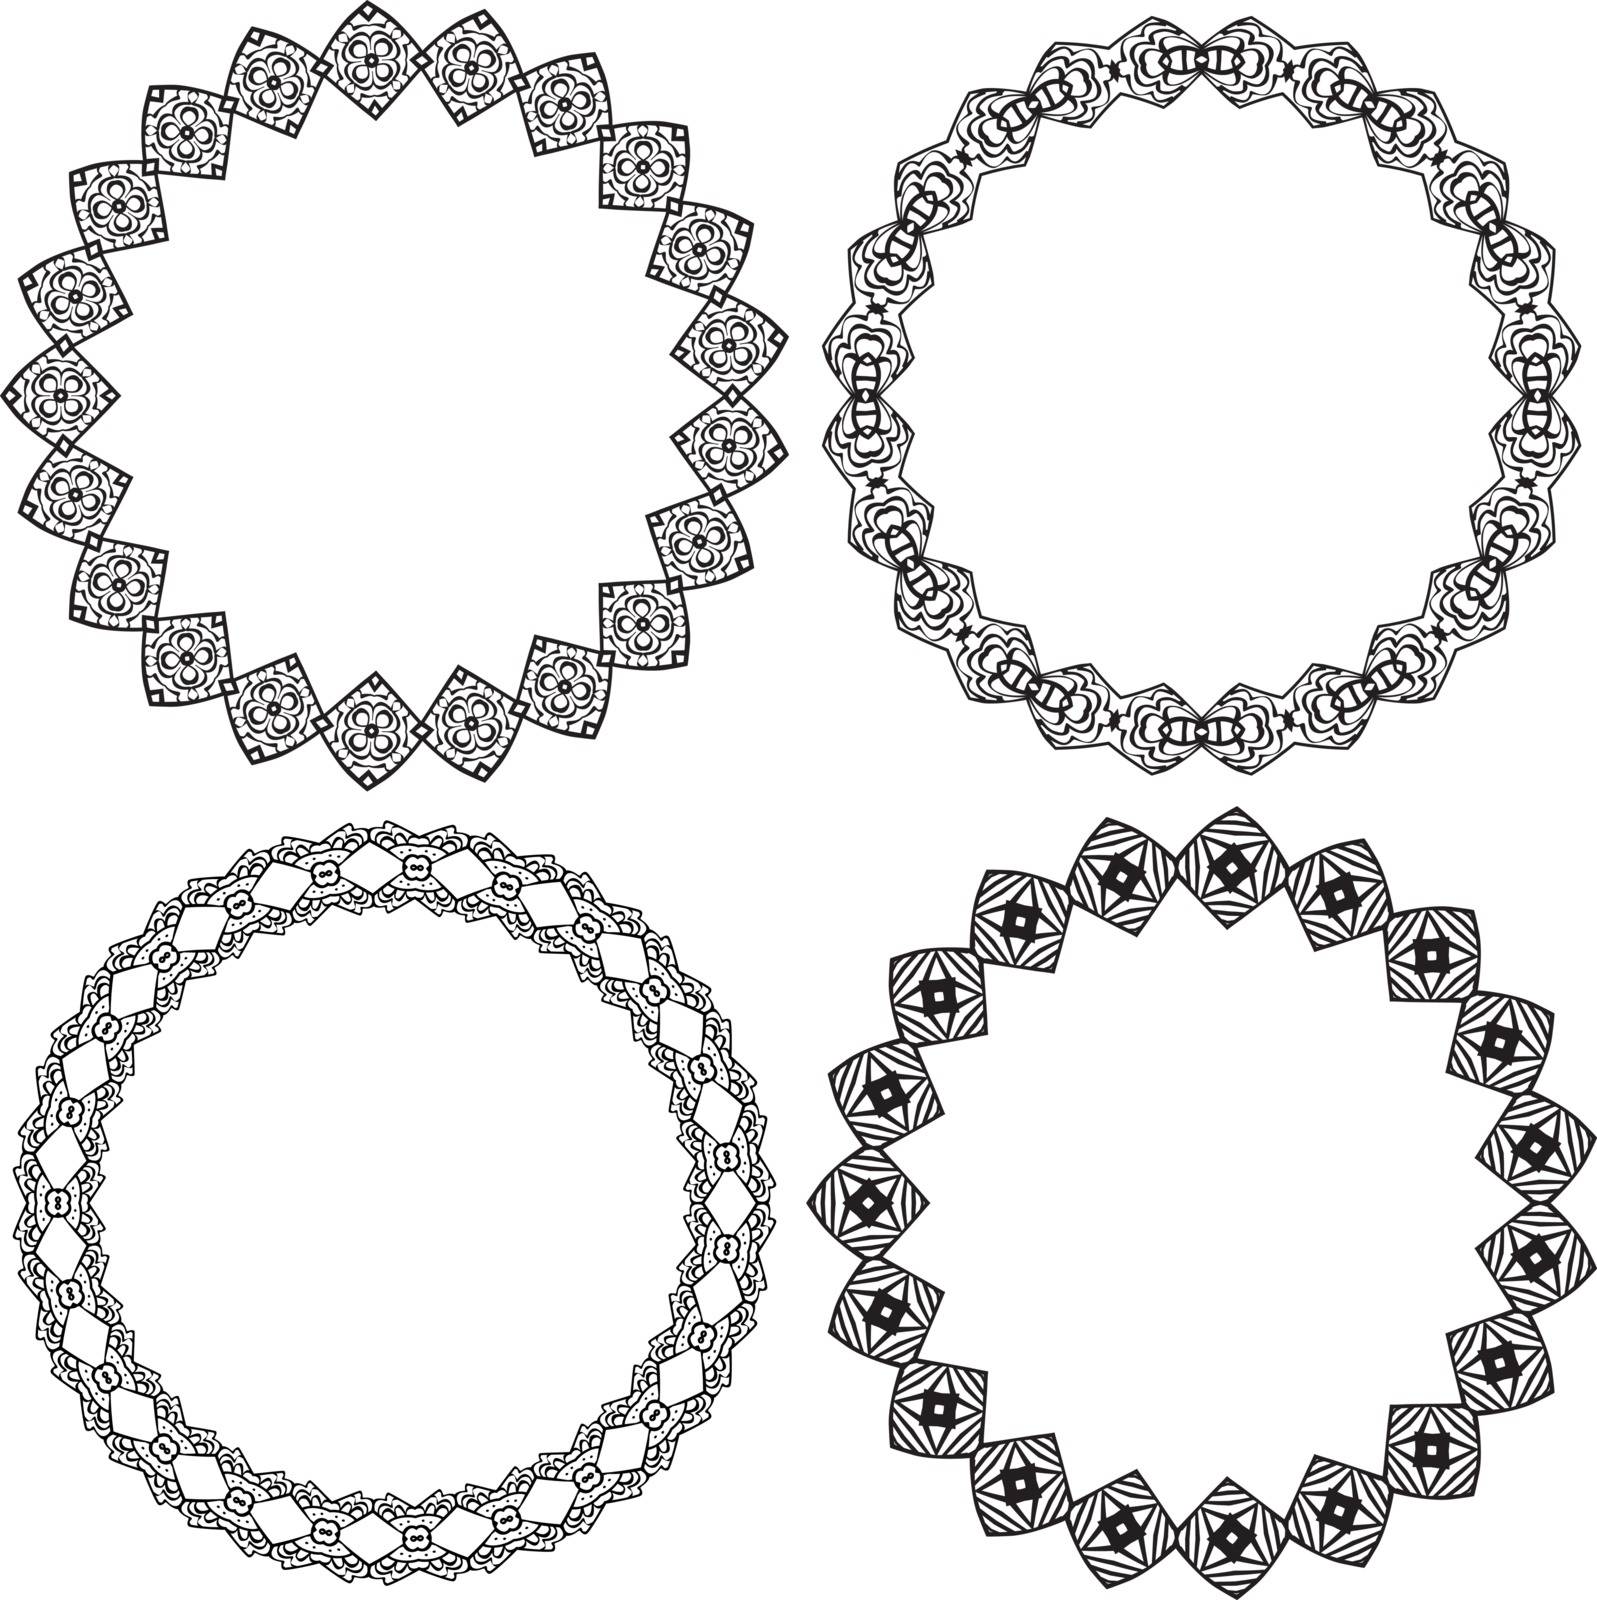 Set of decorative illustrated circle frames made of hand drawn elements - coloring sheet for adults